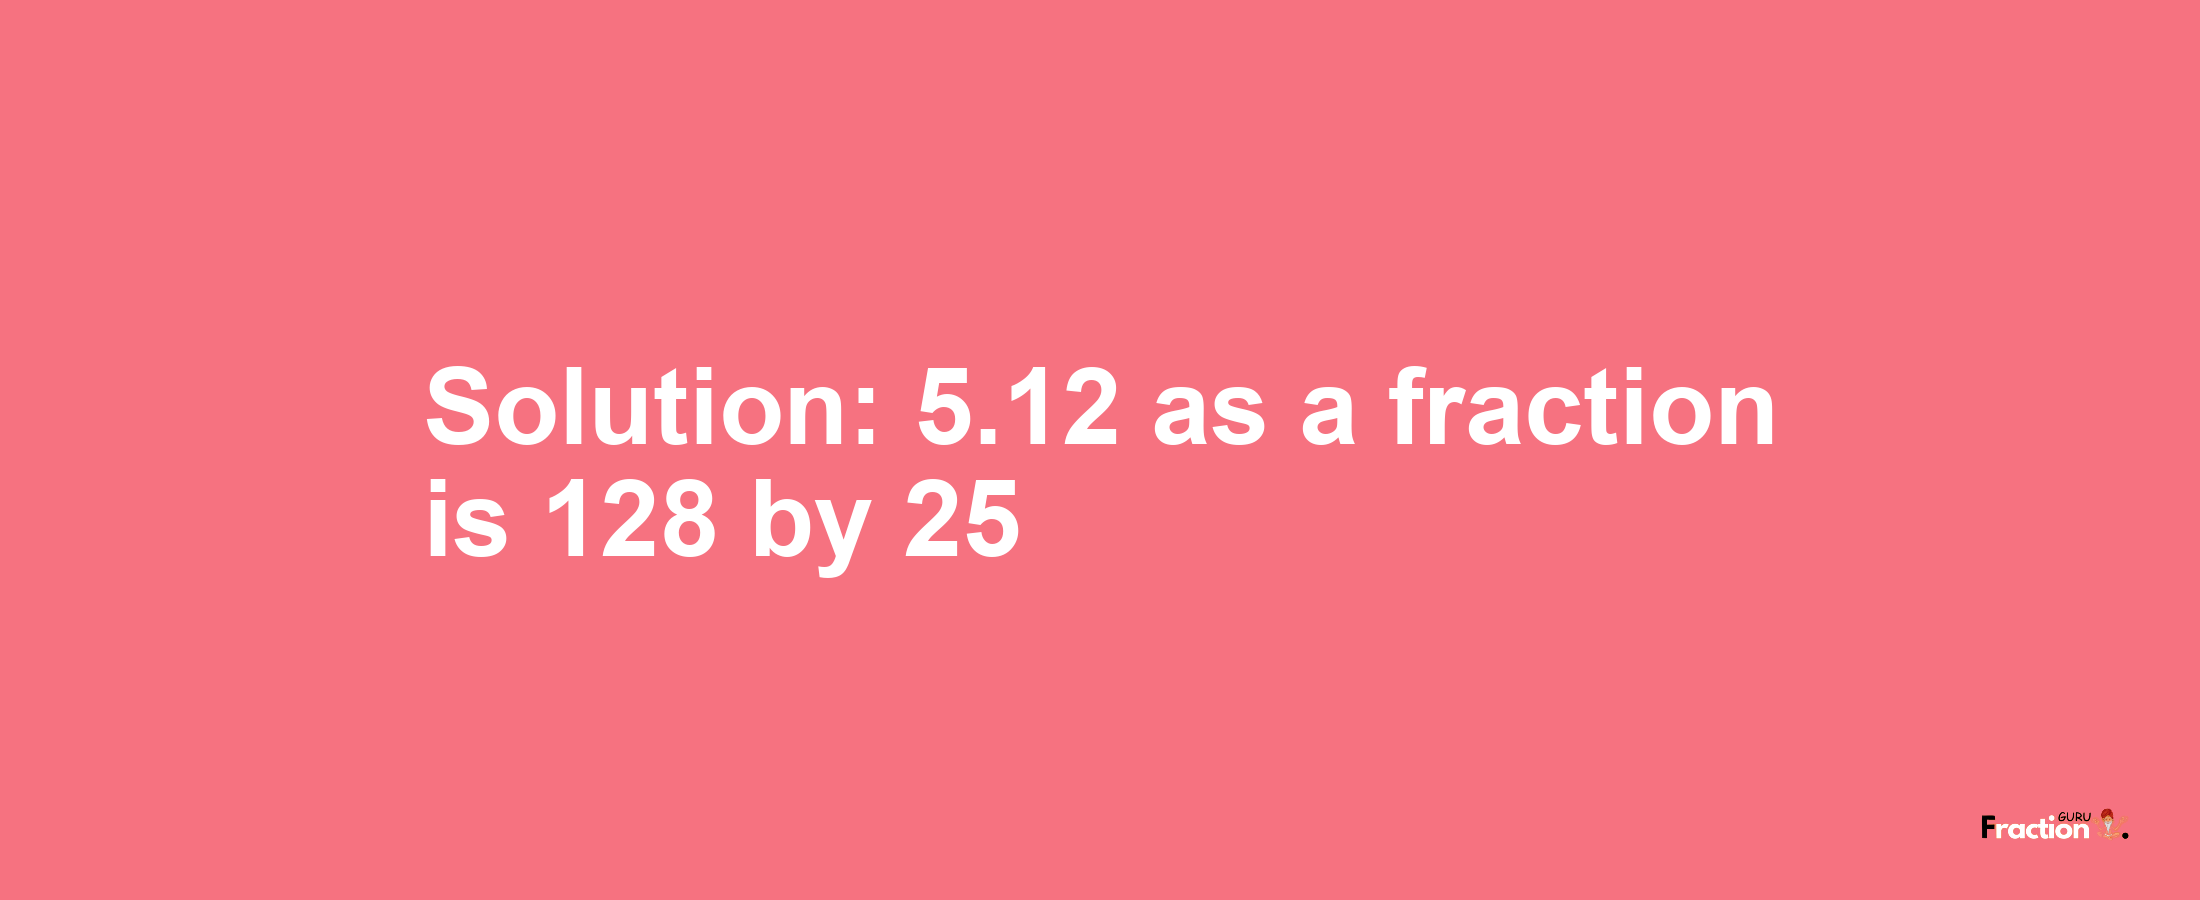 Solution:5.12 as a fraction is 128/25